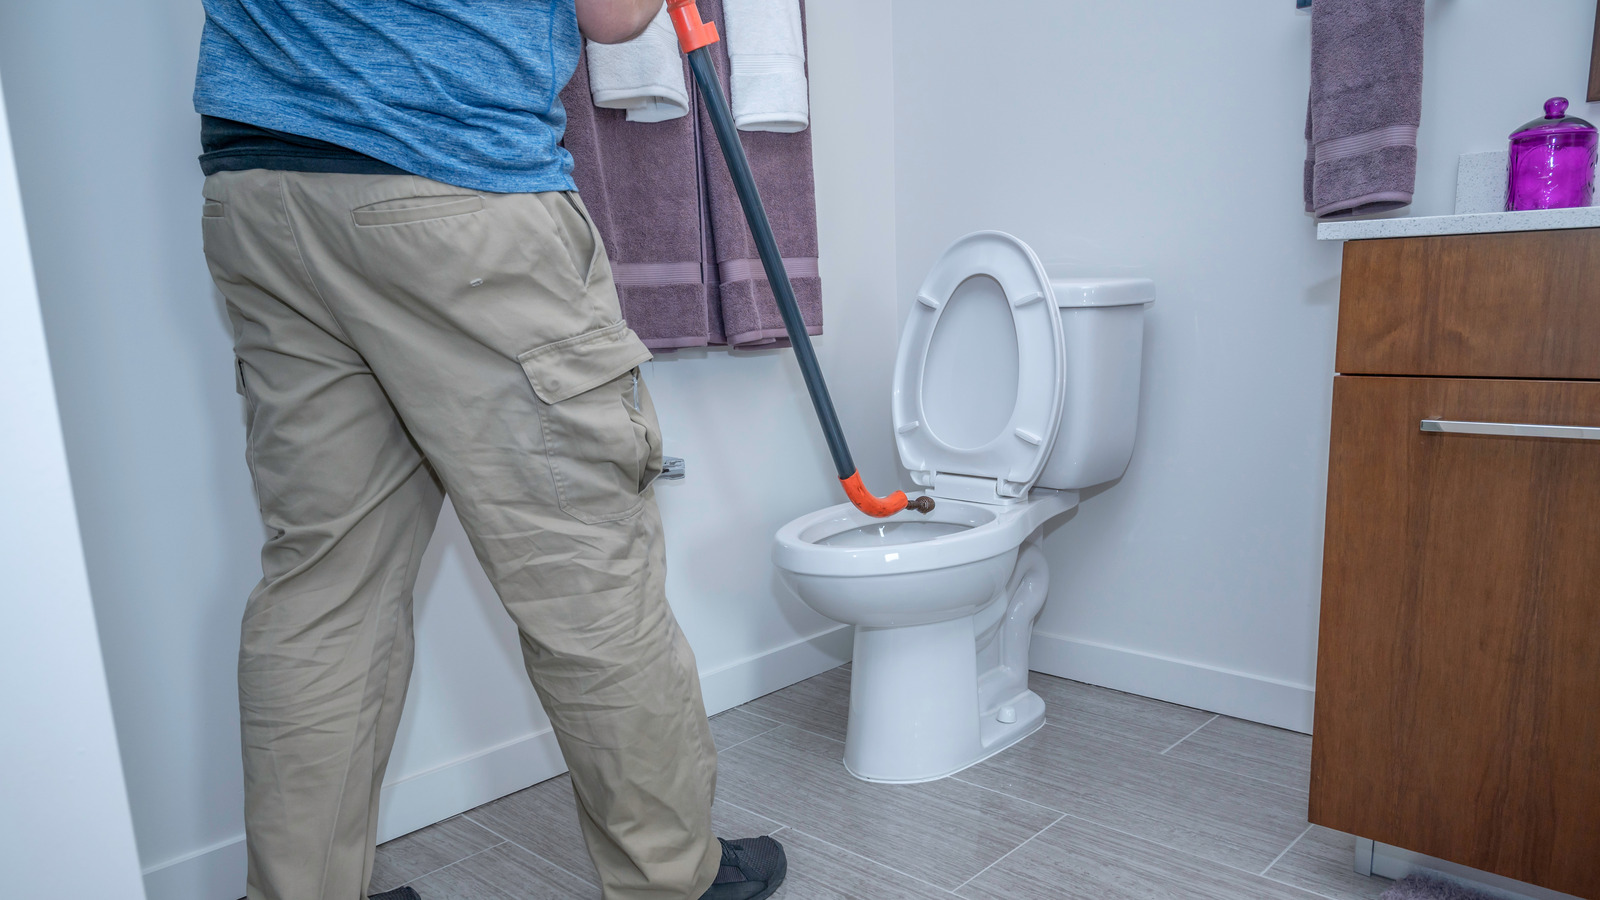 https://www.housedigest.com/img/gallery/what-is-a-toilet-auger-and-how-is-it-different-from-a-plunger/l-intro-1682093383.jpg